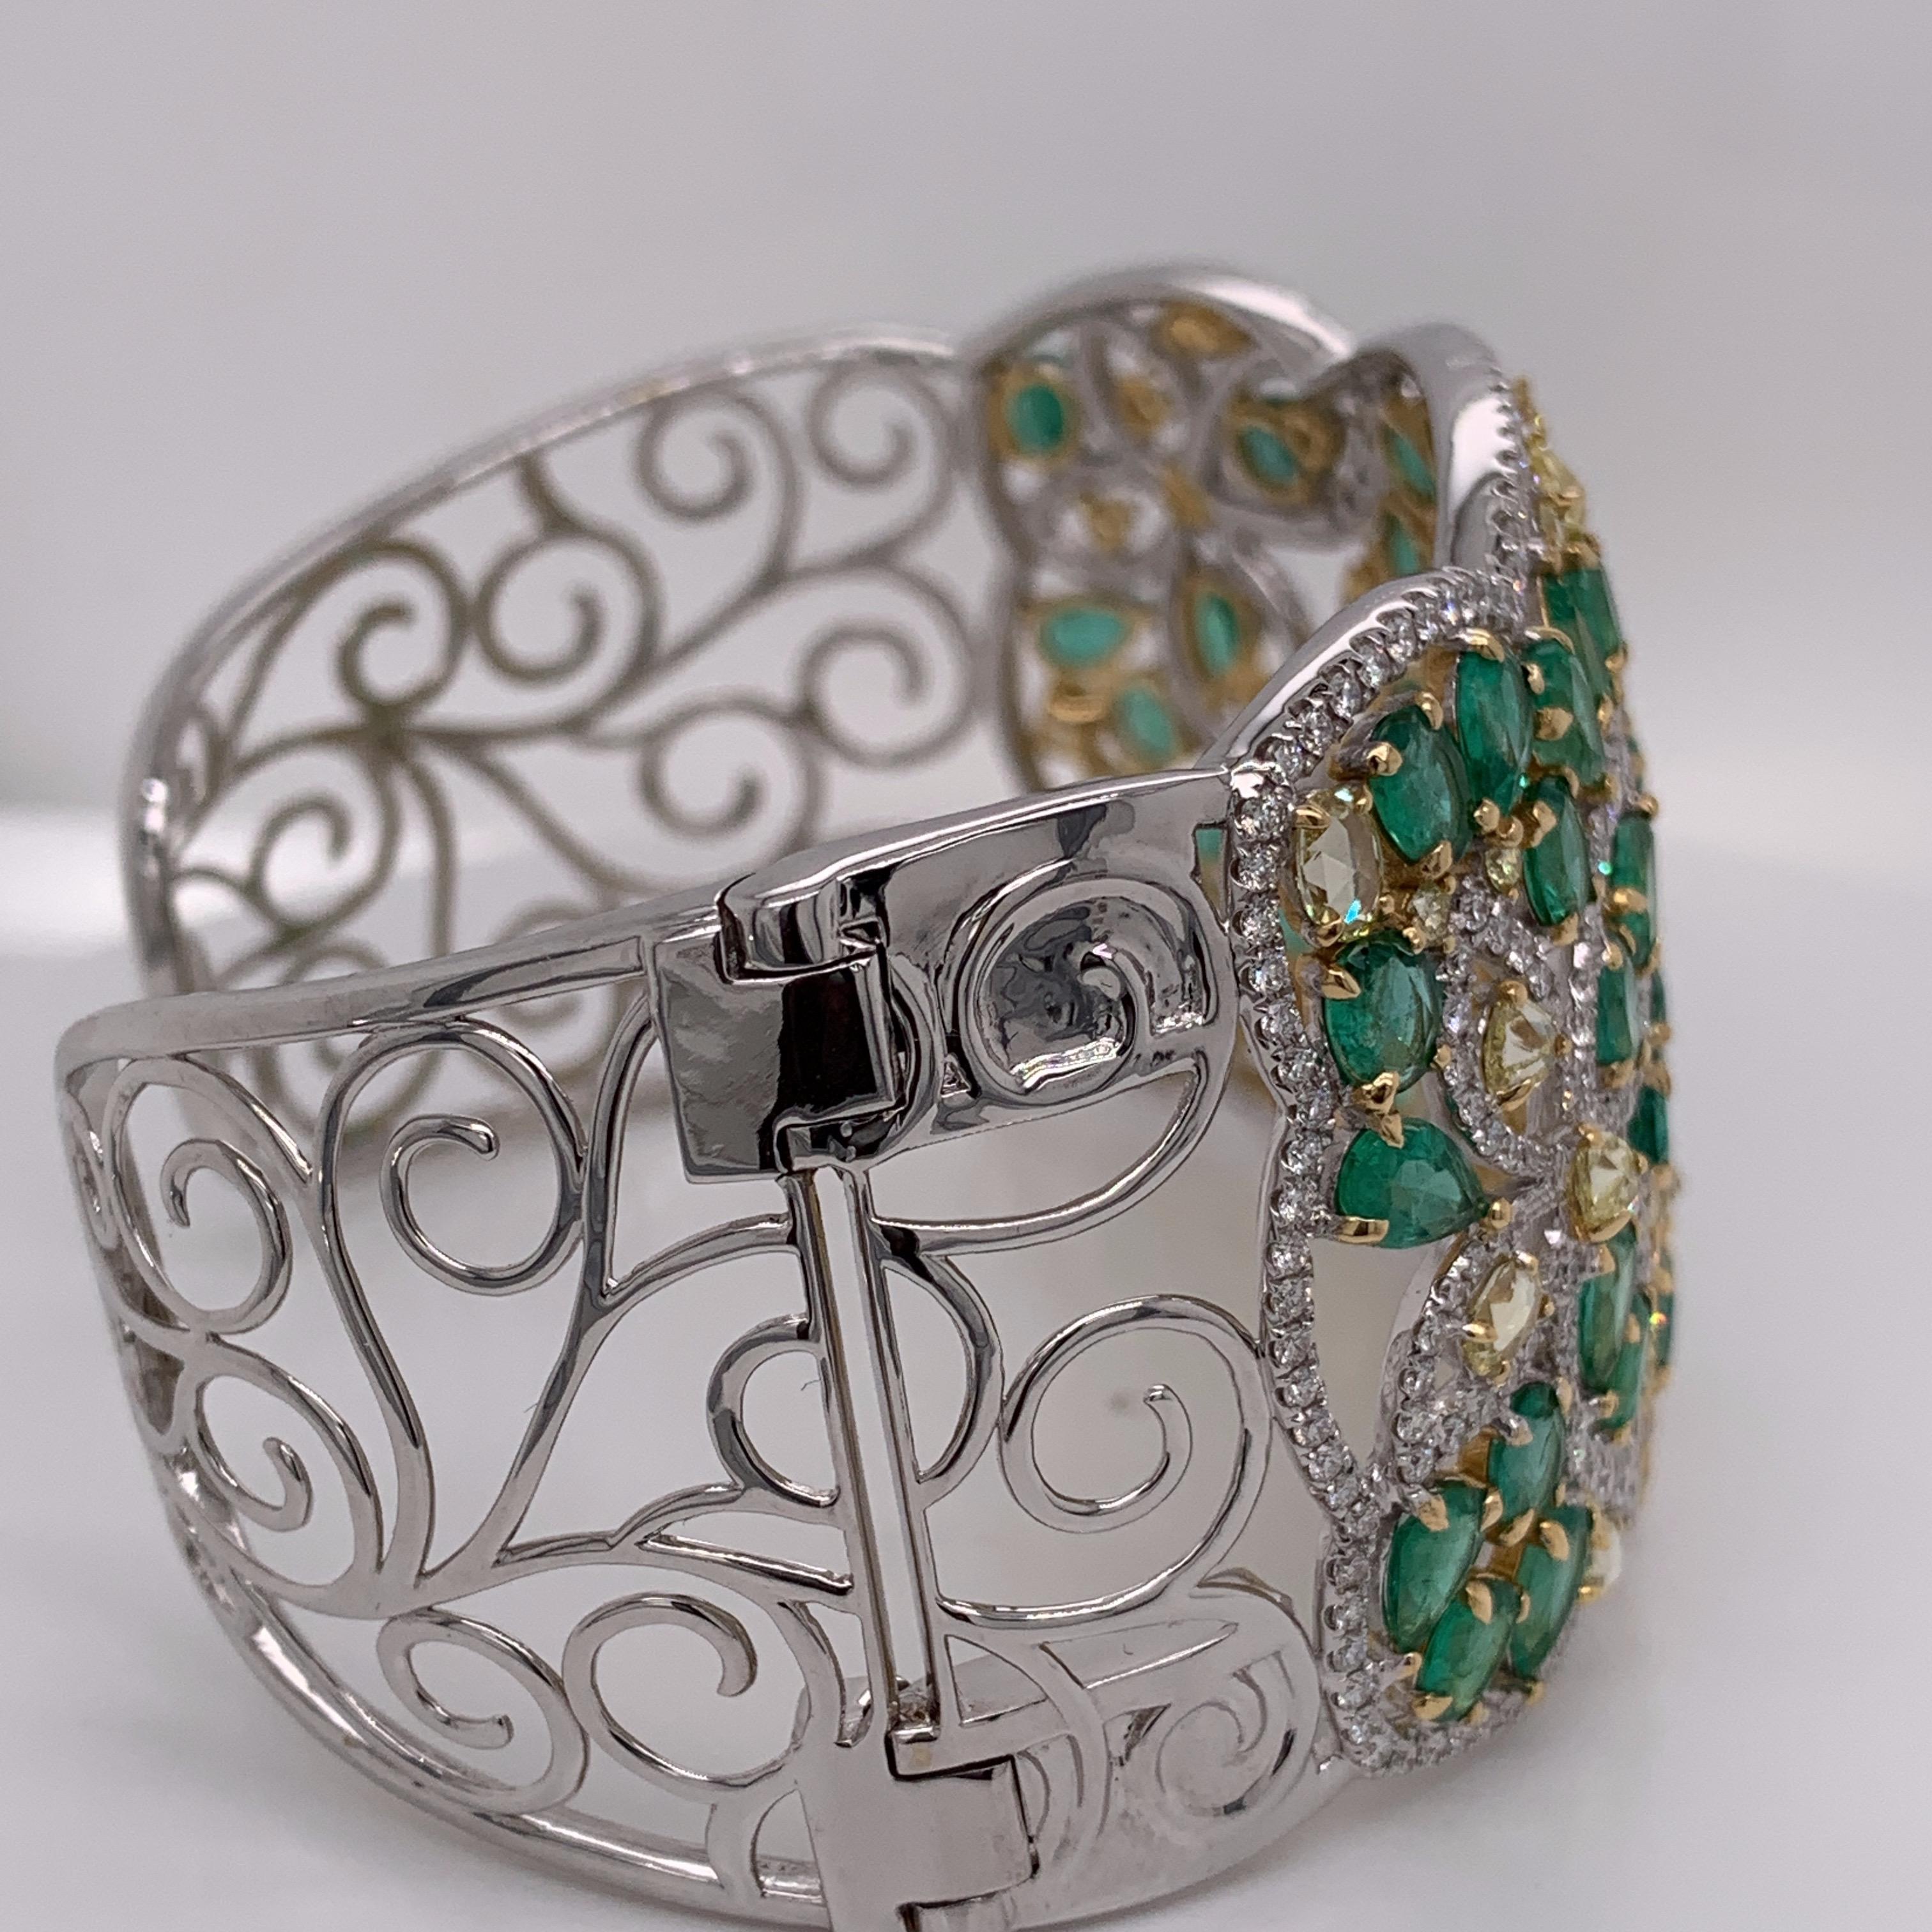 Fancy shaped emerald & diamond cuff bracelet set in two tone gold. A creation of emerald, yellow & white diamond reflects style, sophistication & glamour. One end of the cuff is openable as shown in one of the images. 
Emerald: 15.13ct
Yellow